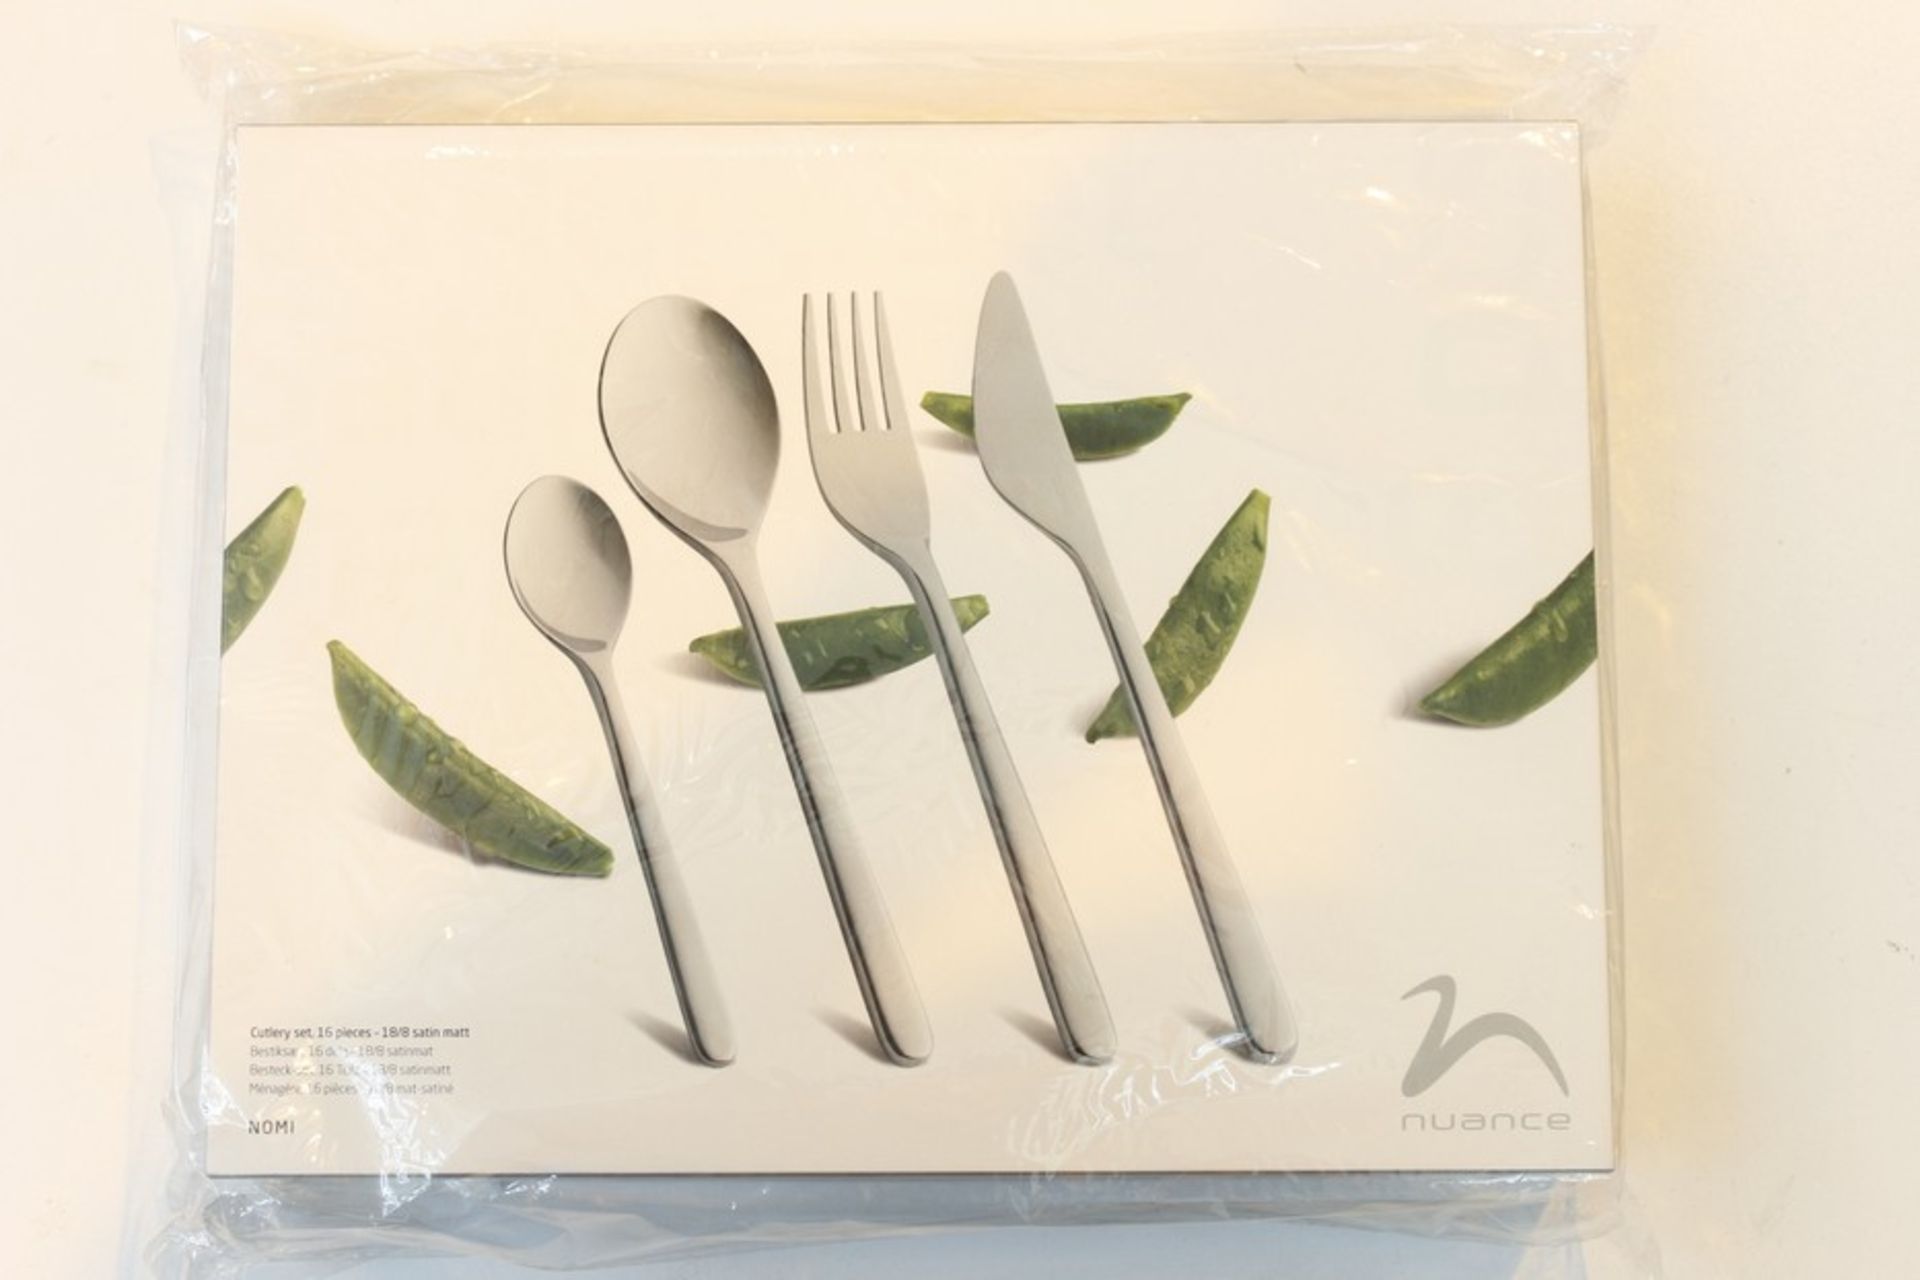 1 x BOXED NUANCE NOMI 16 PIECE SATIN CUTLERY SET RRP £160  *PLEASE NOTE THAT THE BID PRICE IS